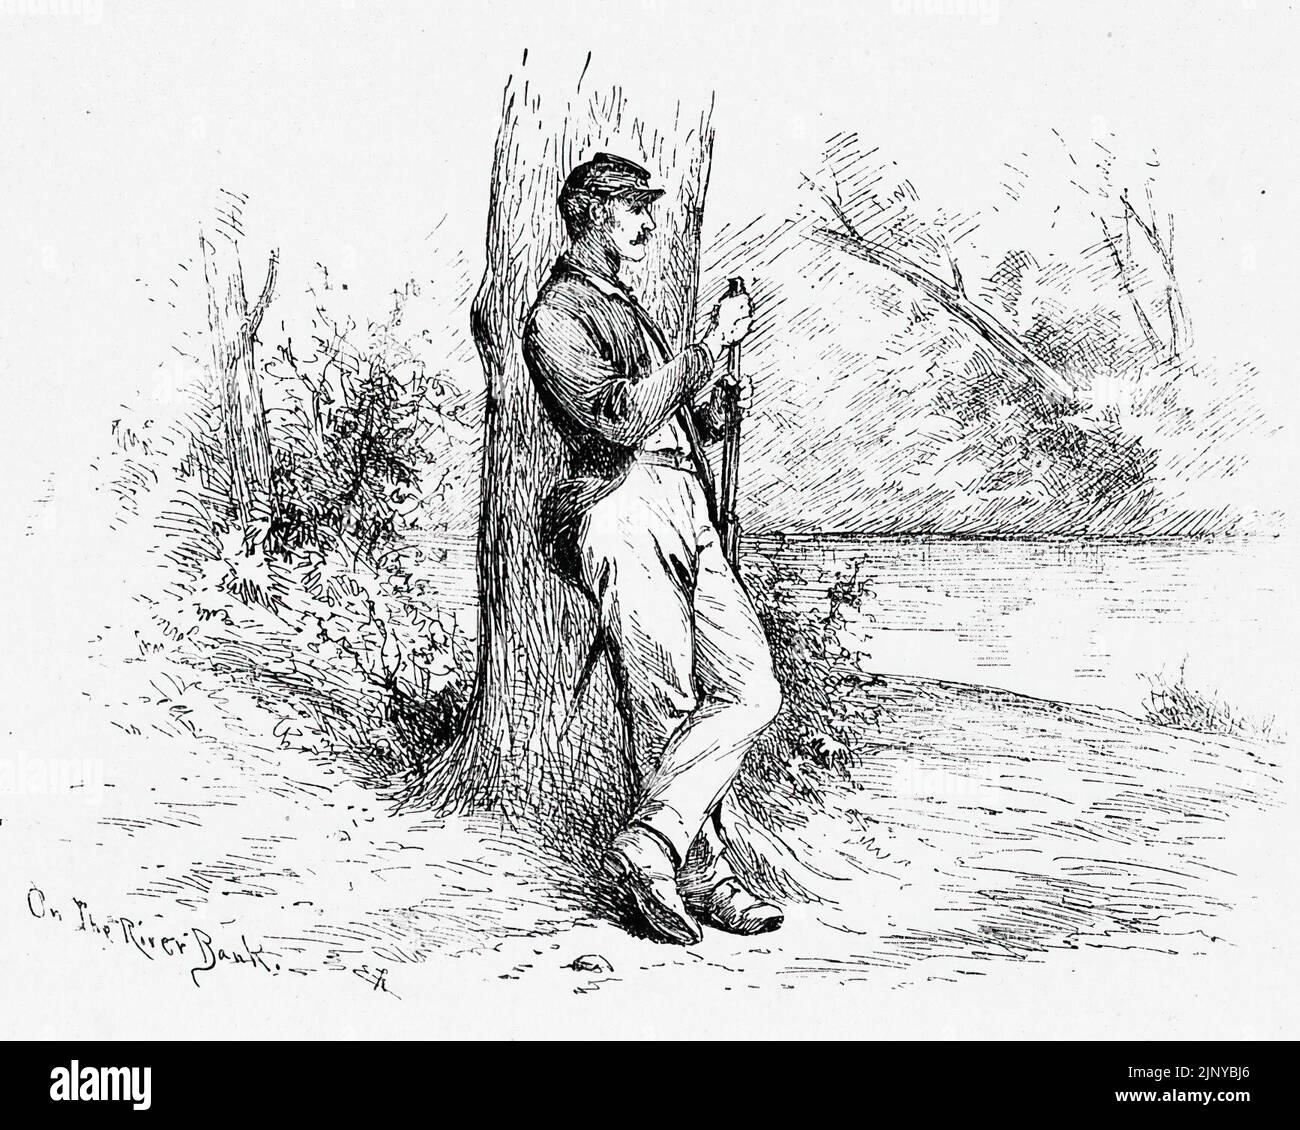 On the River Bank. Union Army picket line. 19th century American Civil War illustration by Edwin Forbes Stock Photo